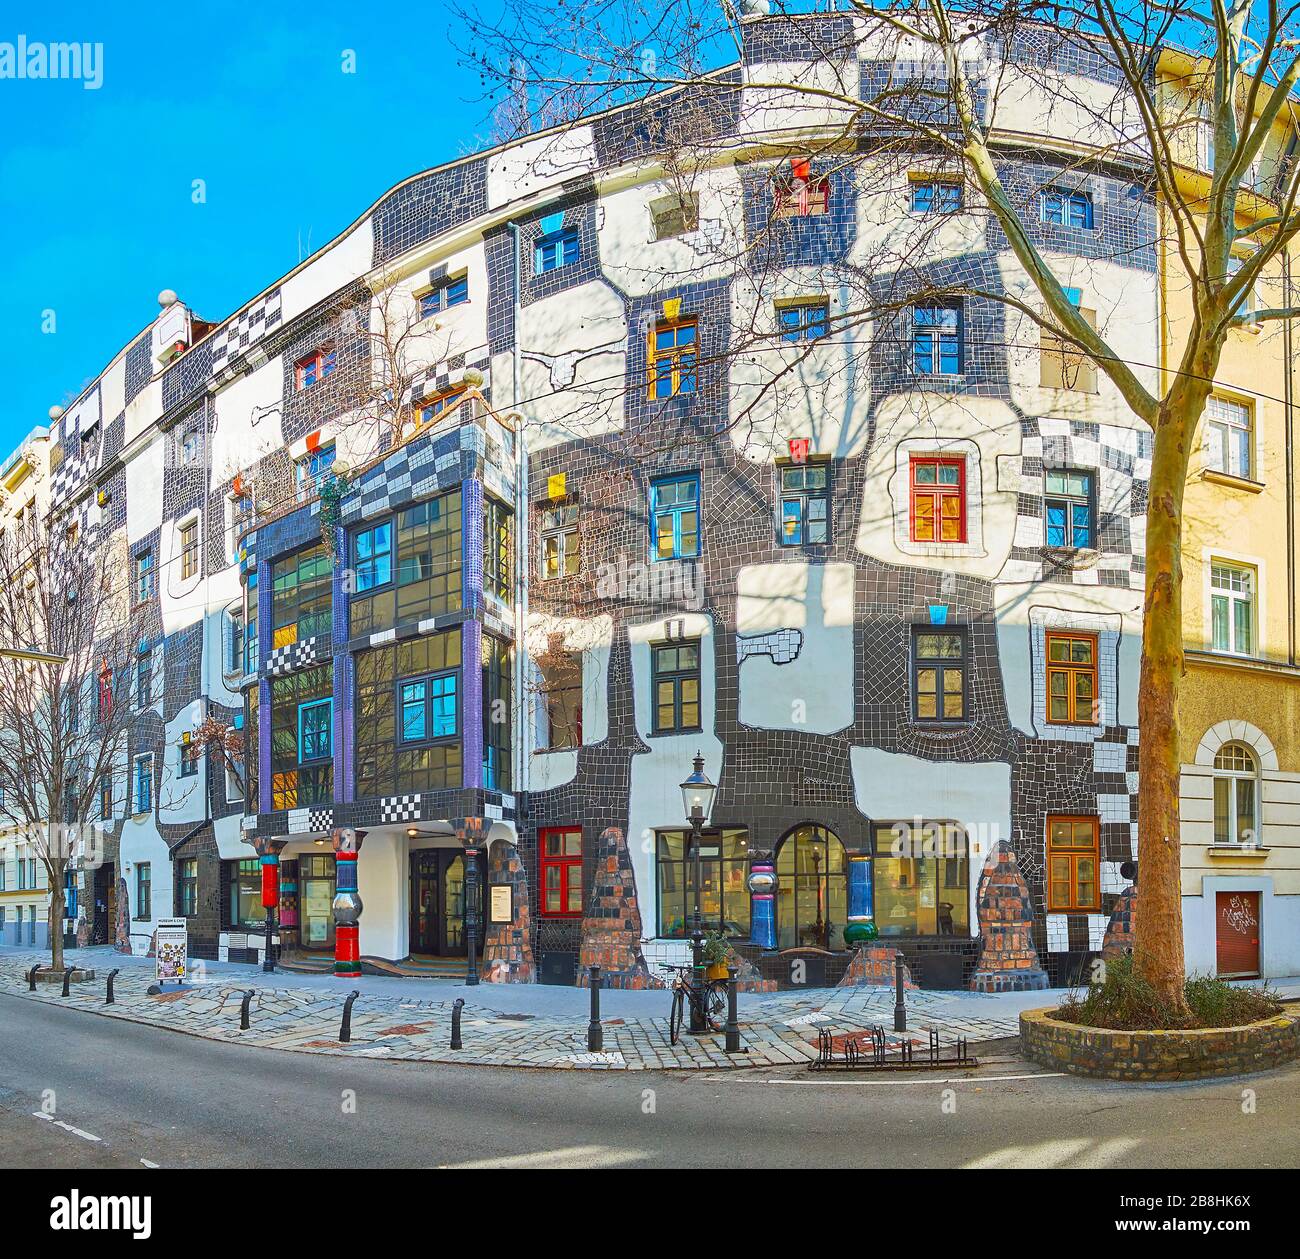 VIENNA, AUSTRIA - FEBRUARY 19, 2019: The beautiful facade of Hundertwasser museum (Kunst Haus Wien), decorated with black-white tilling, pillars, colo Stock Photo